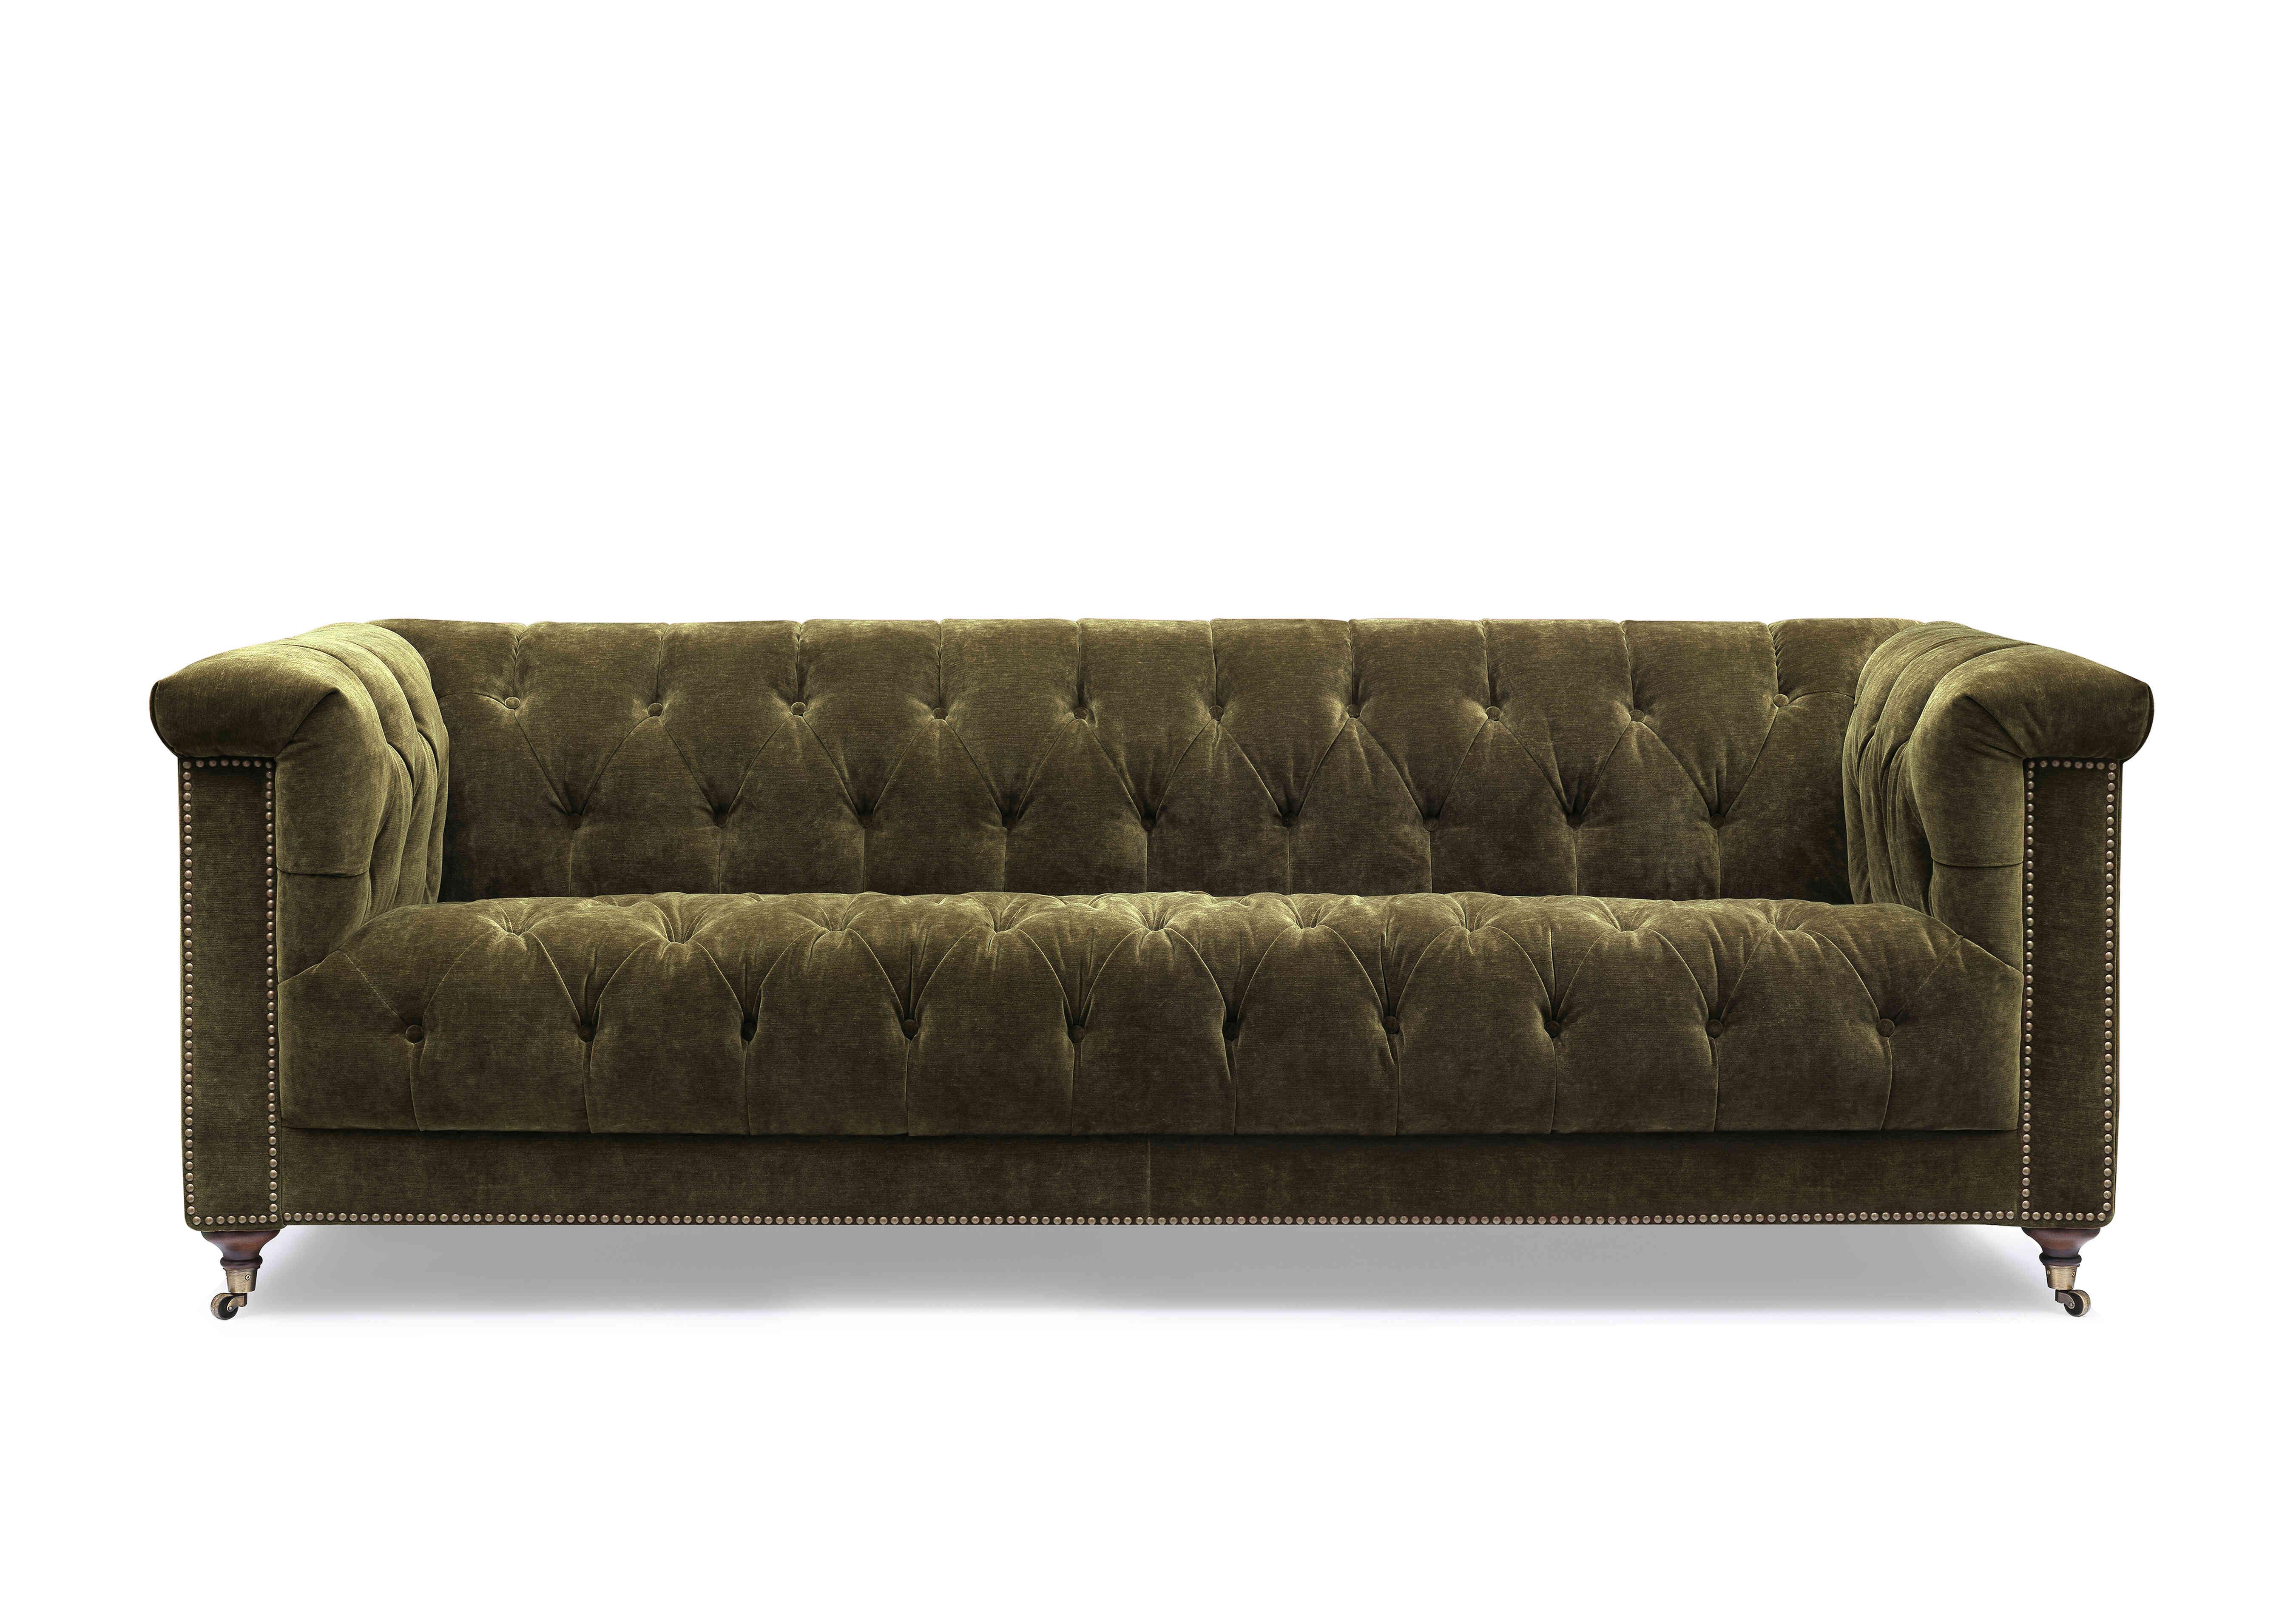 Wallace 4 Seater Fabric Chesterfield Sofa with USB-C in X3y1-W018 Pine on Furniture Village